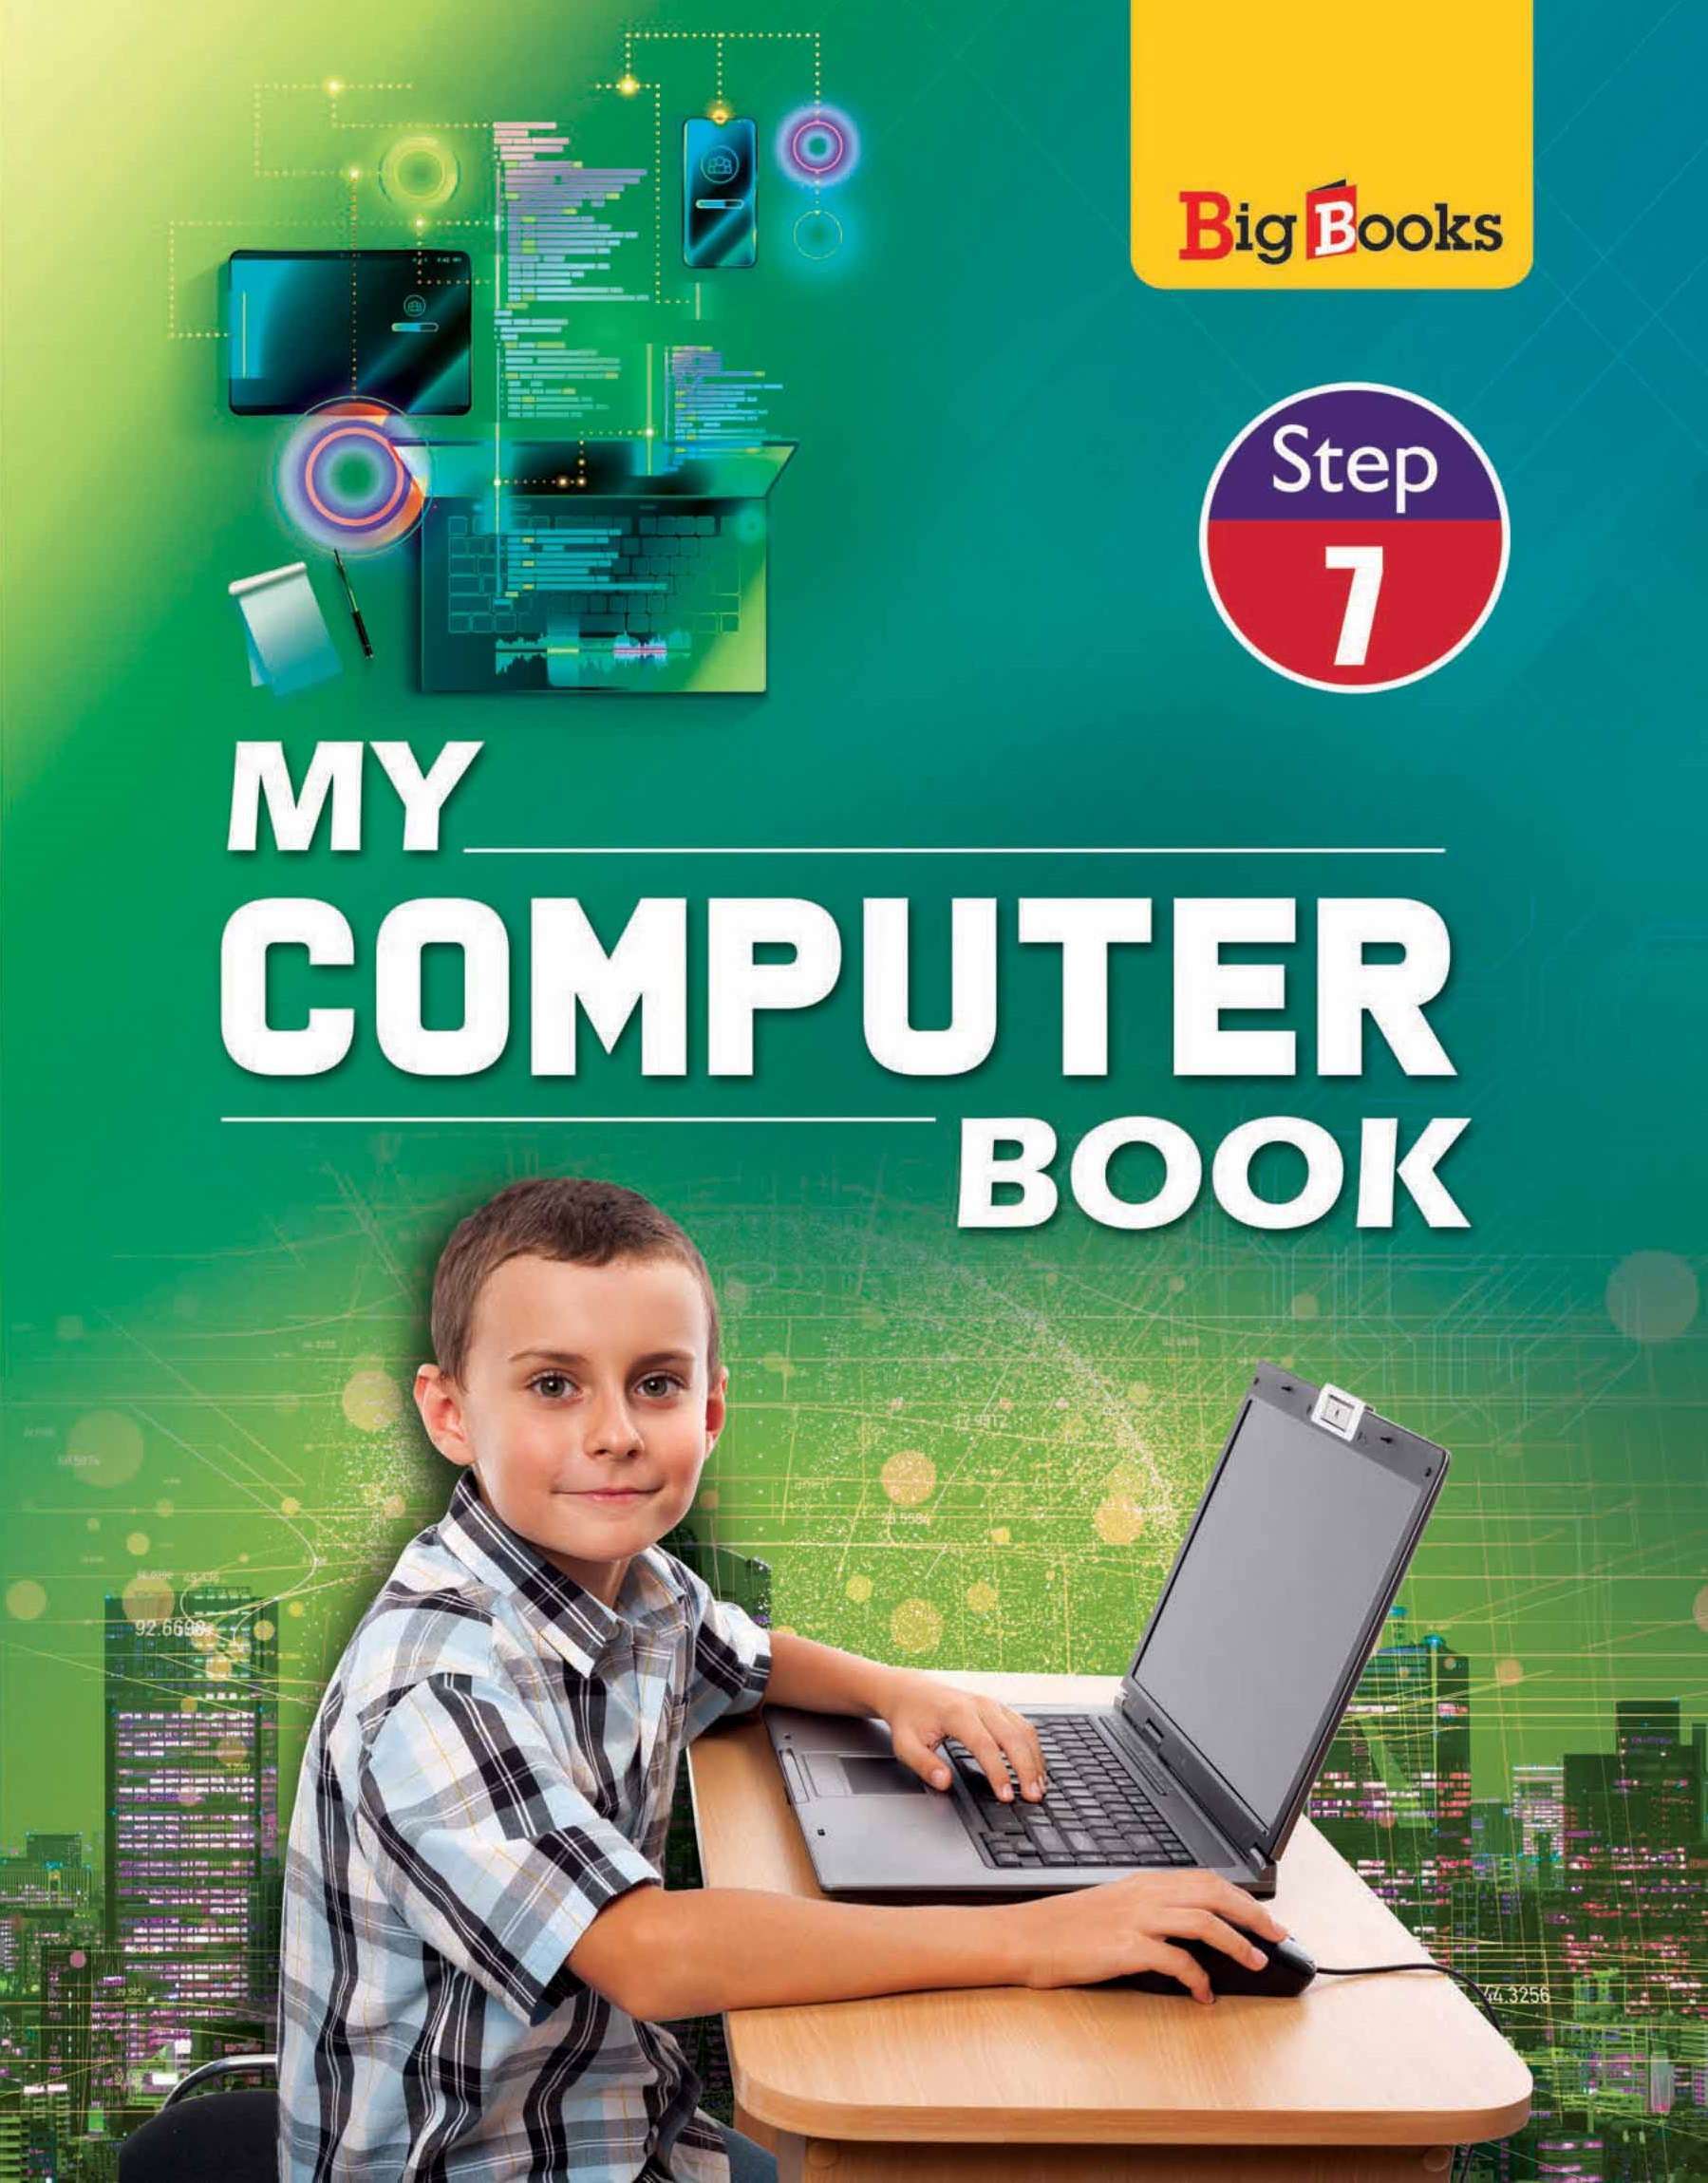 Buy computer books for 7 online